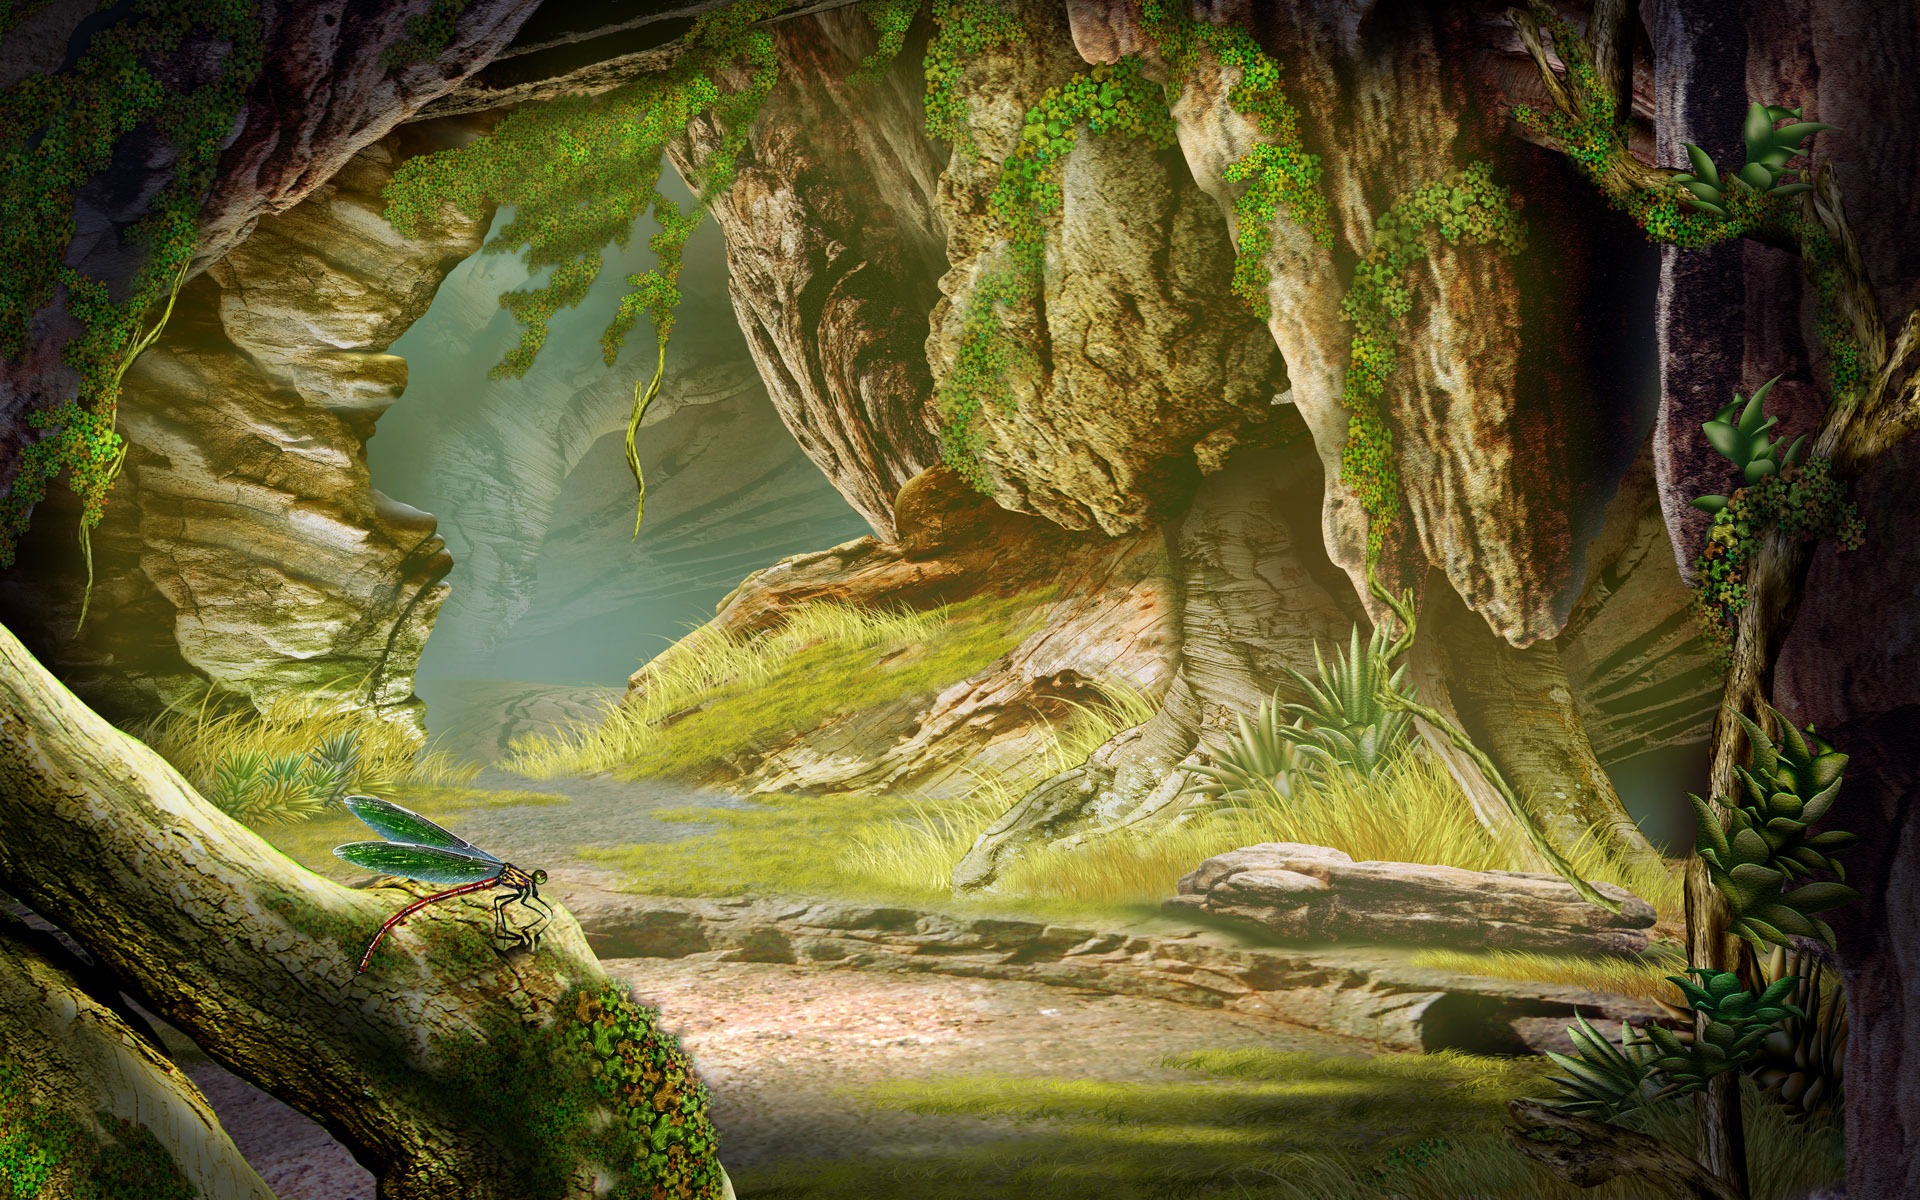 Colorful Hand-painted Wallpaper Landscape Ecology - Outside The Cave - HD Wallpaper 